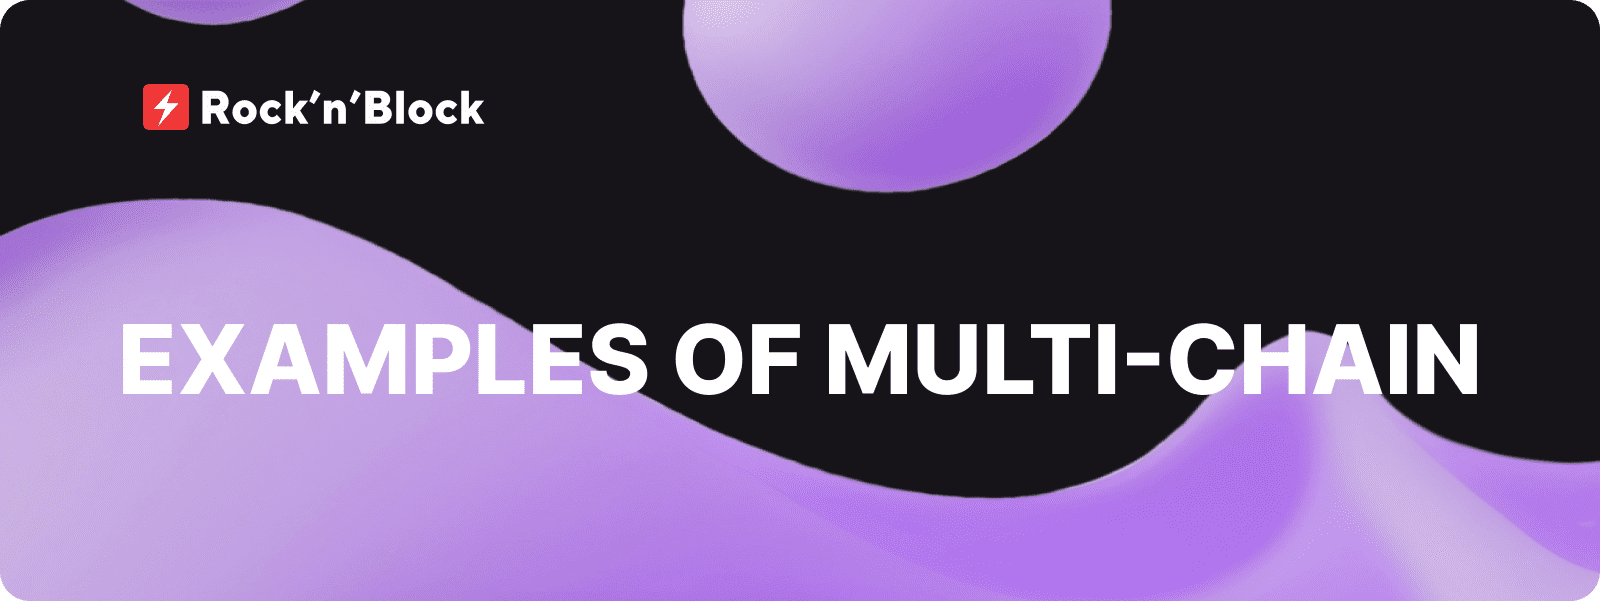 Examples of Multi-Chain projects